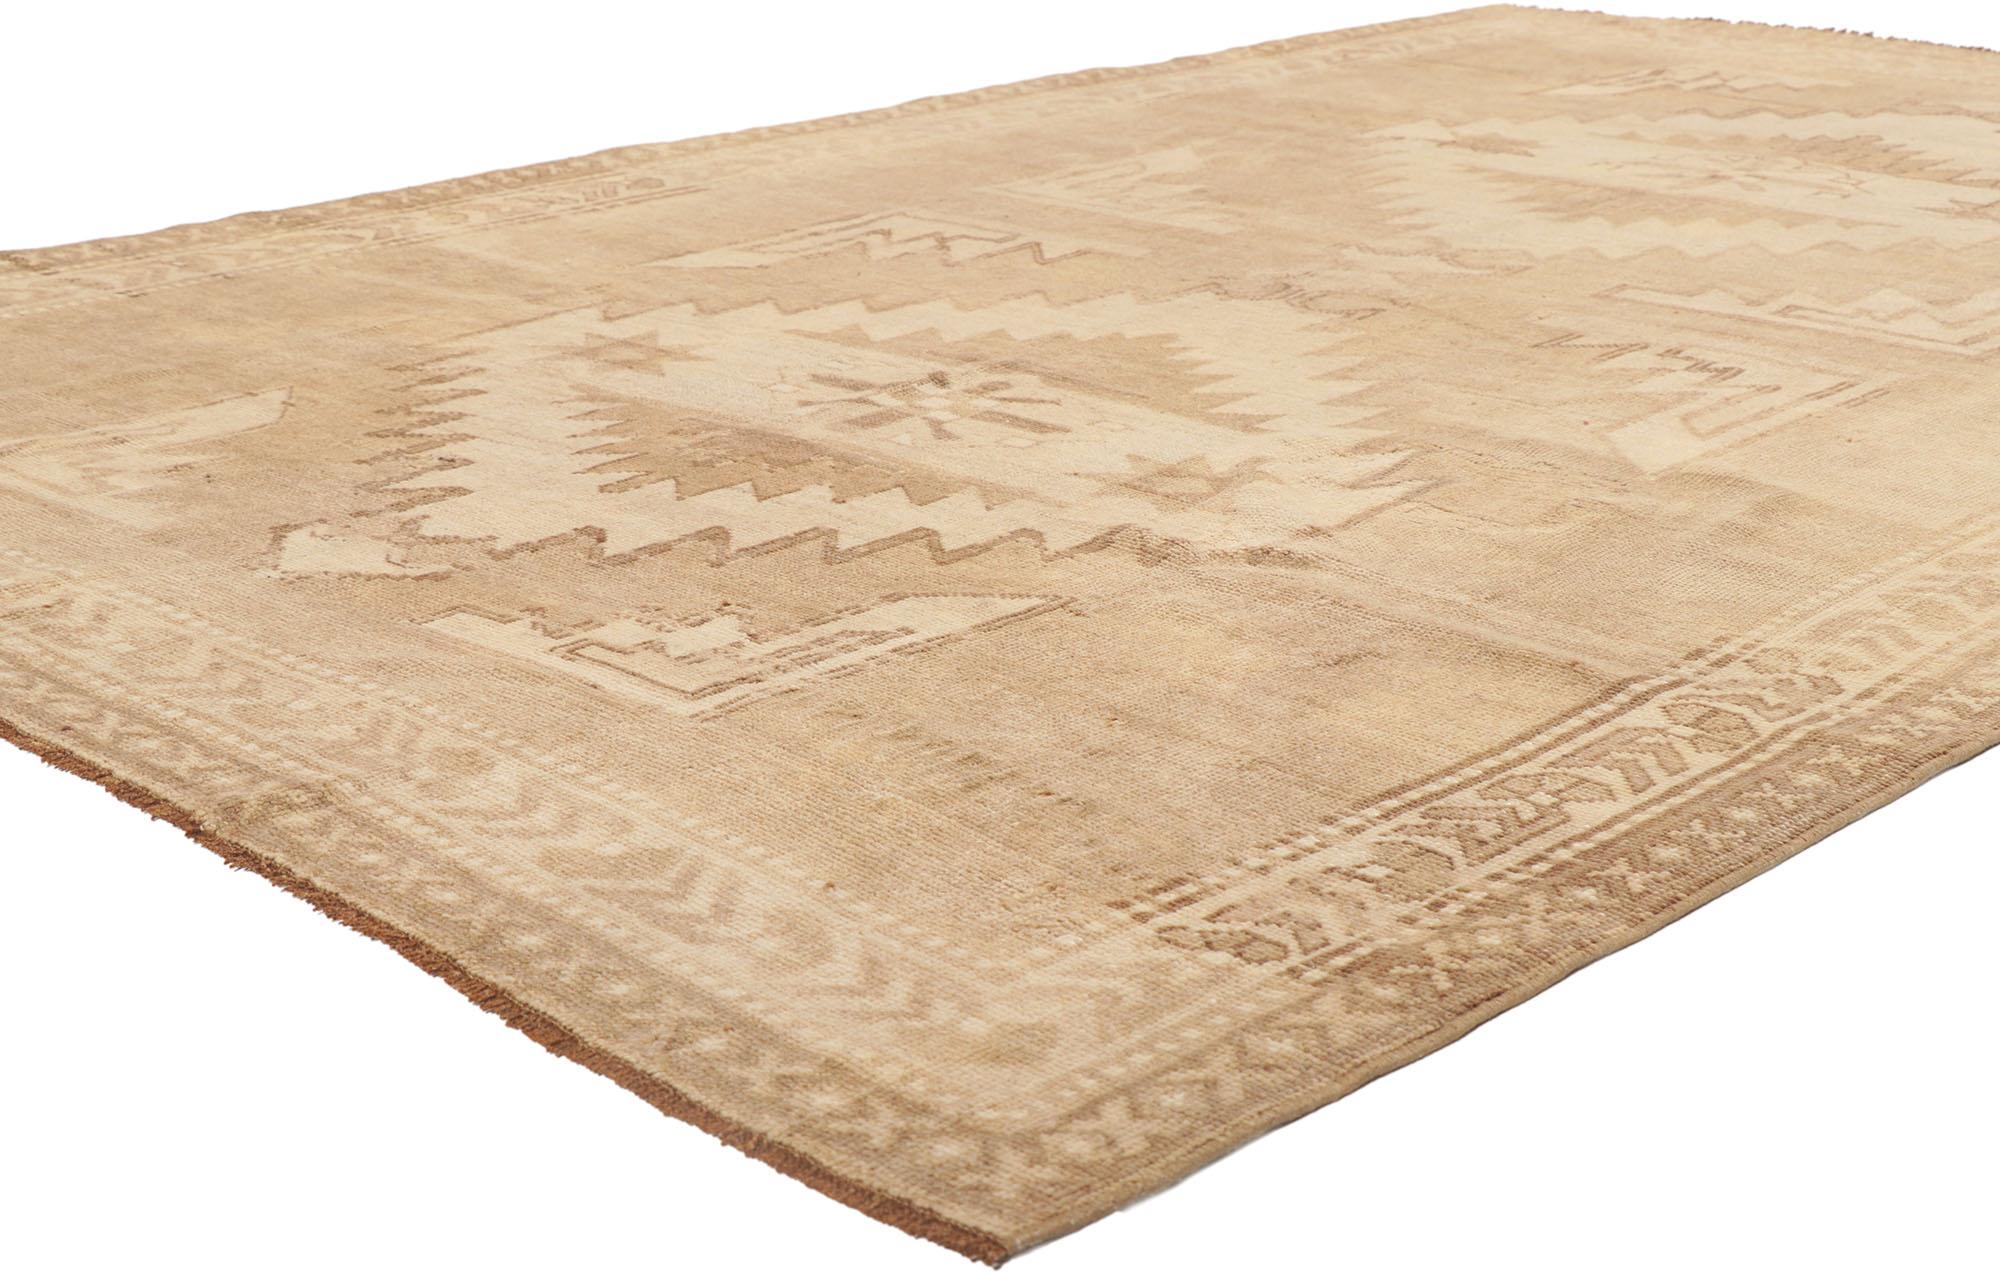 ?53725 Vintage Turkish Oushak Rug with Warm Monochromatic Tribal Style 06'02 x 09'02.Full of tiny details and an expressive tribal design combined with soft pastel colors, this hand-knotted wool vintage Turkish Oushak rug is a captivating vision of